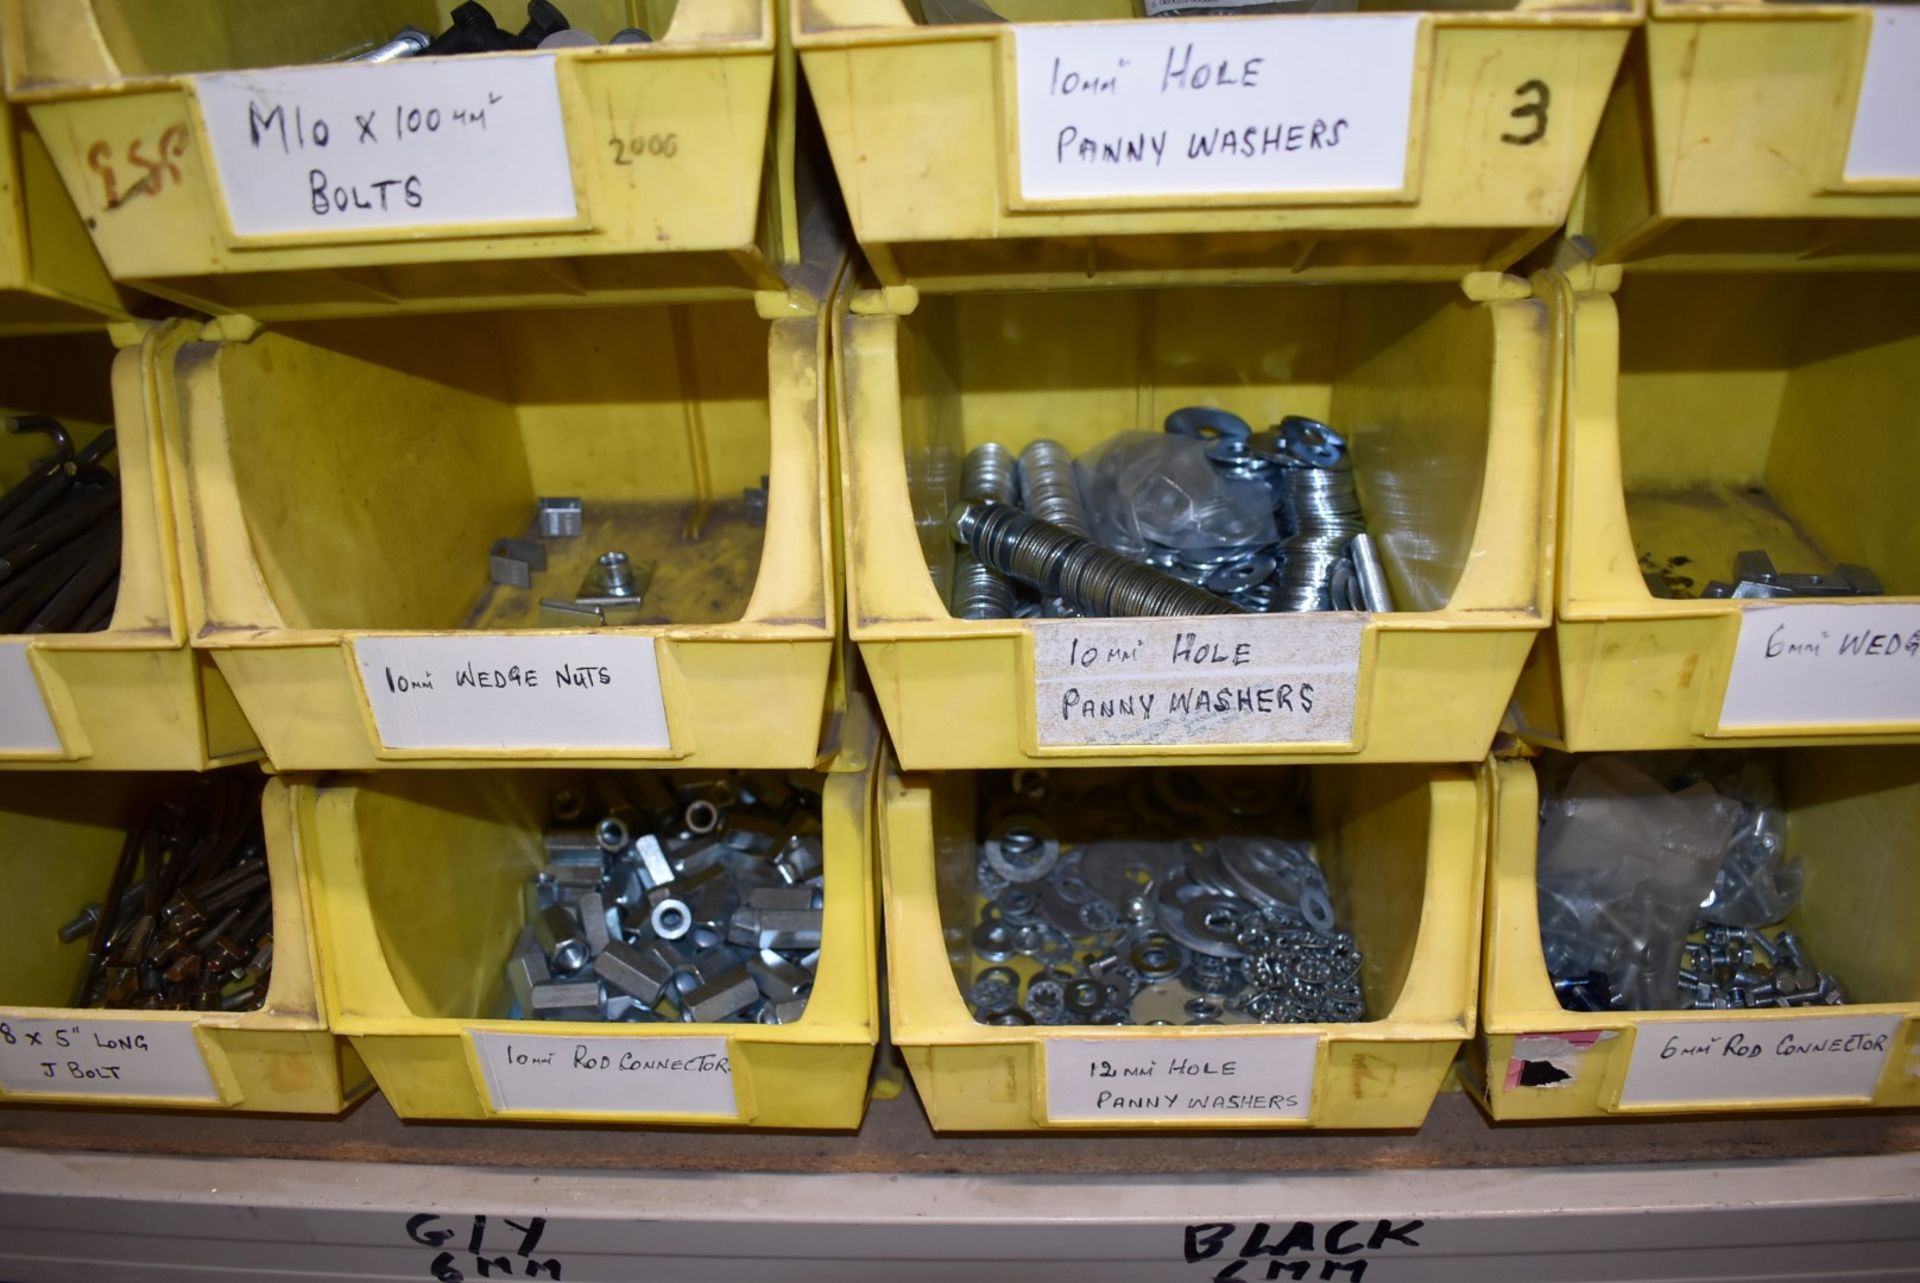 43 x Linbins With Contents - Clamps, Rod Connectors, Zebs, Washers, Bolts, Hex Nuts, Cleats & More! - Image 17 of 37